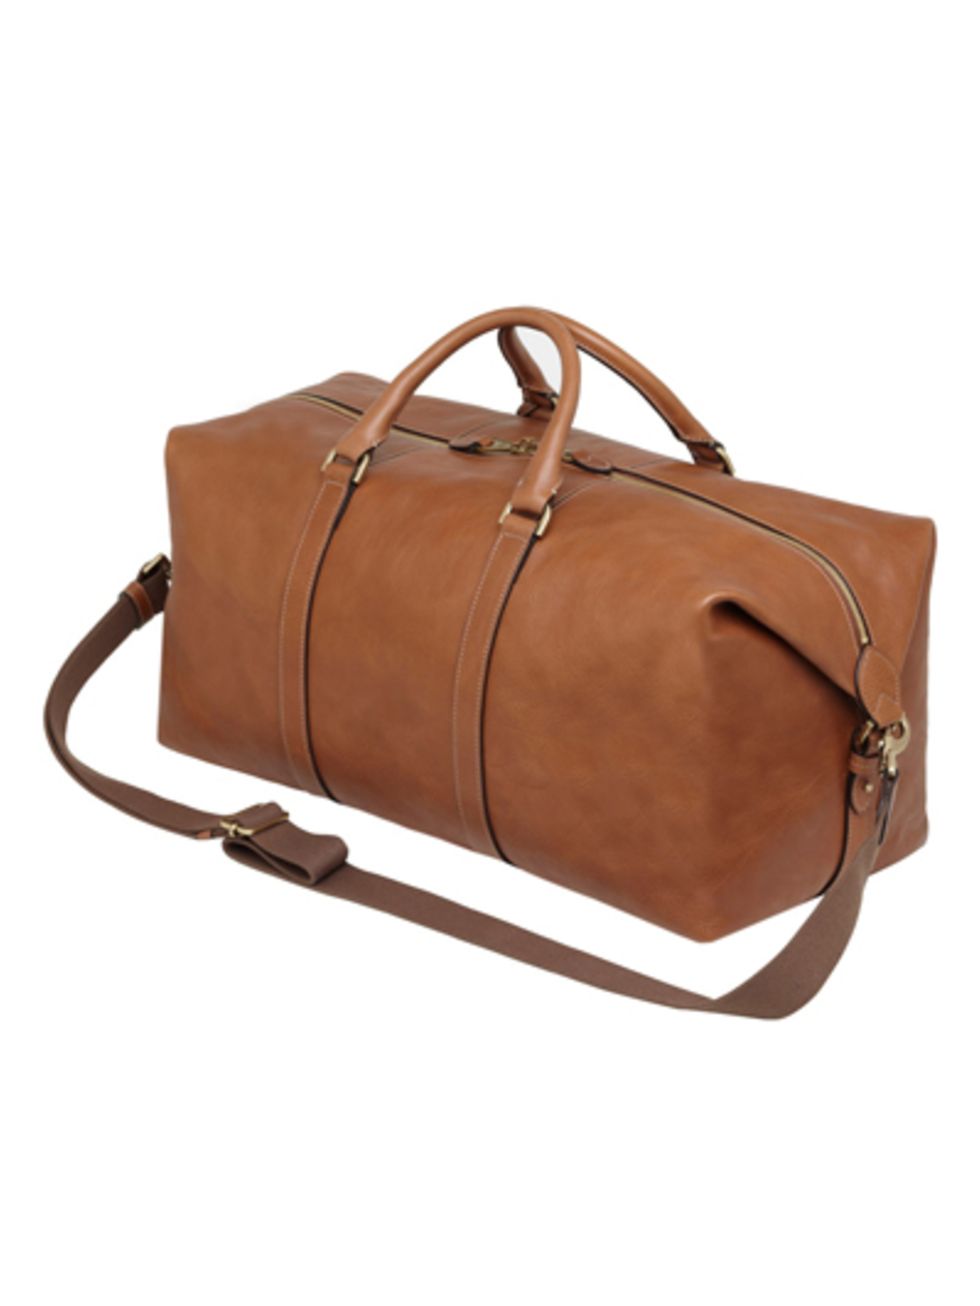 Product, Brown, Bag, Style, Tan, Luggage and bags, Fashion accessory, Khaki, Leather, Shoulder bag, 